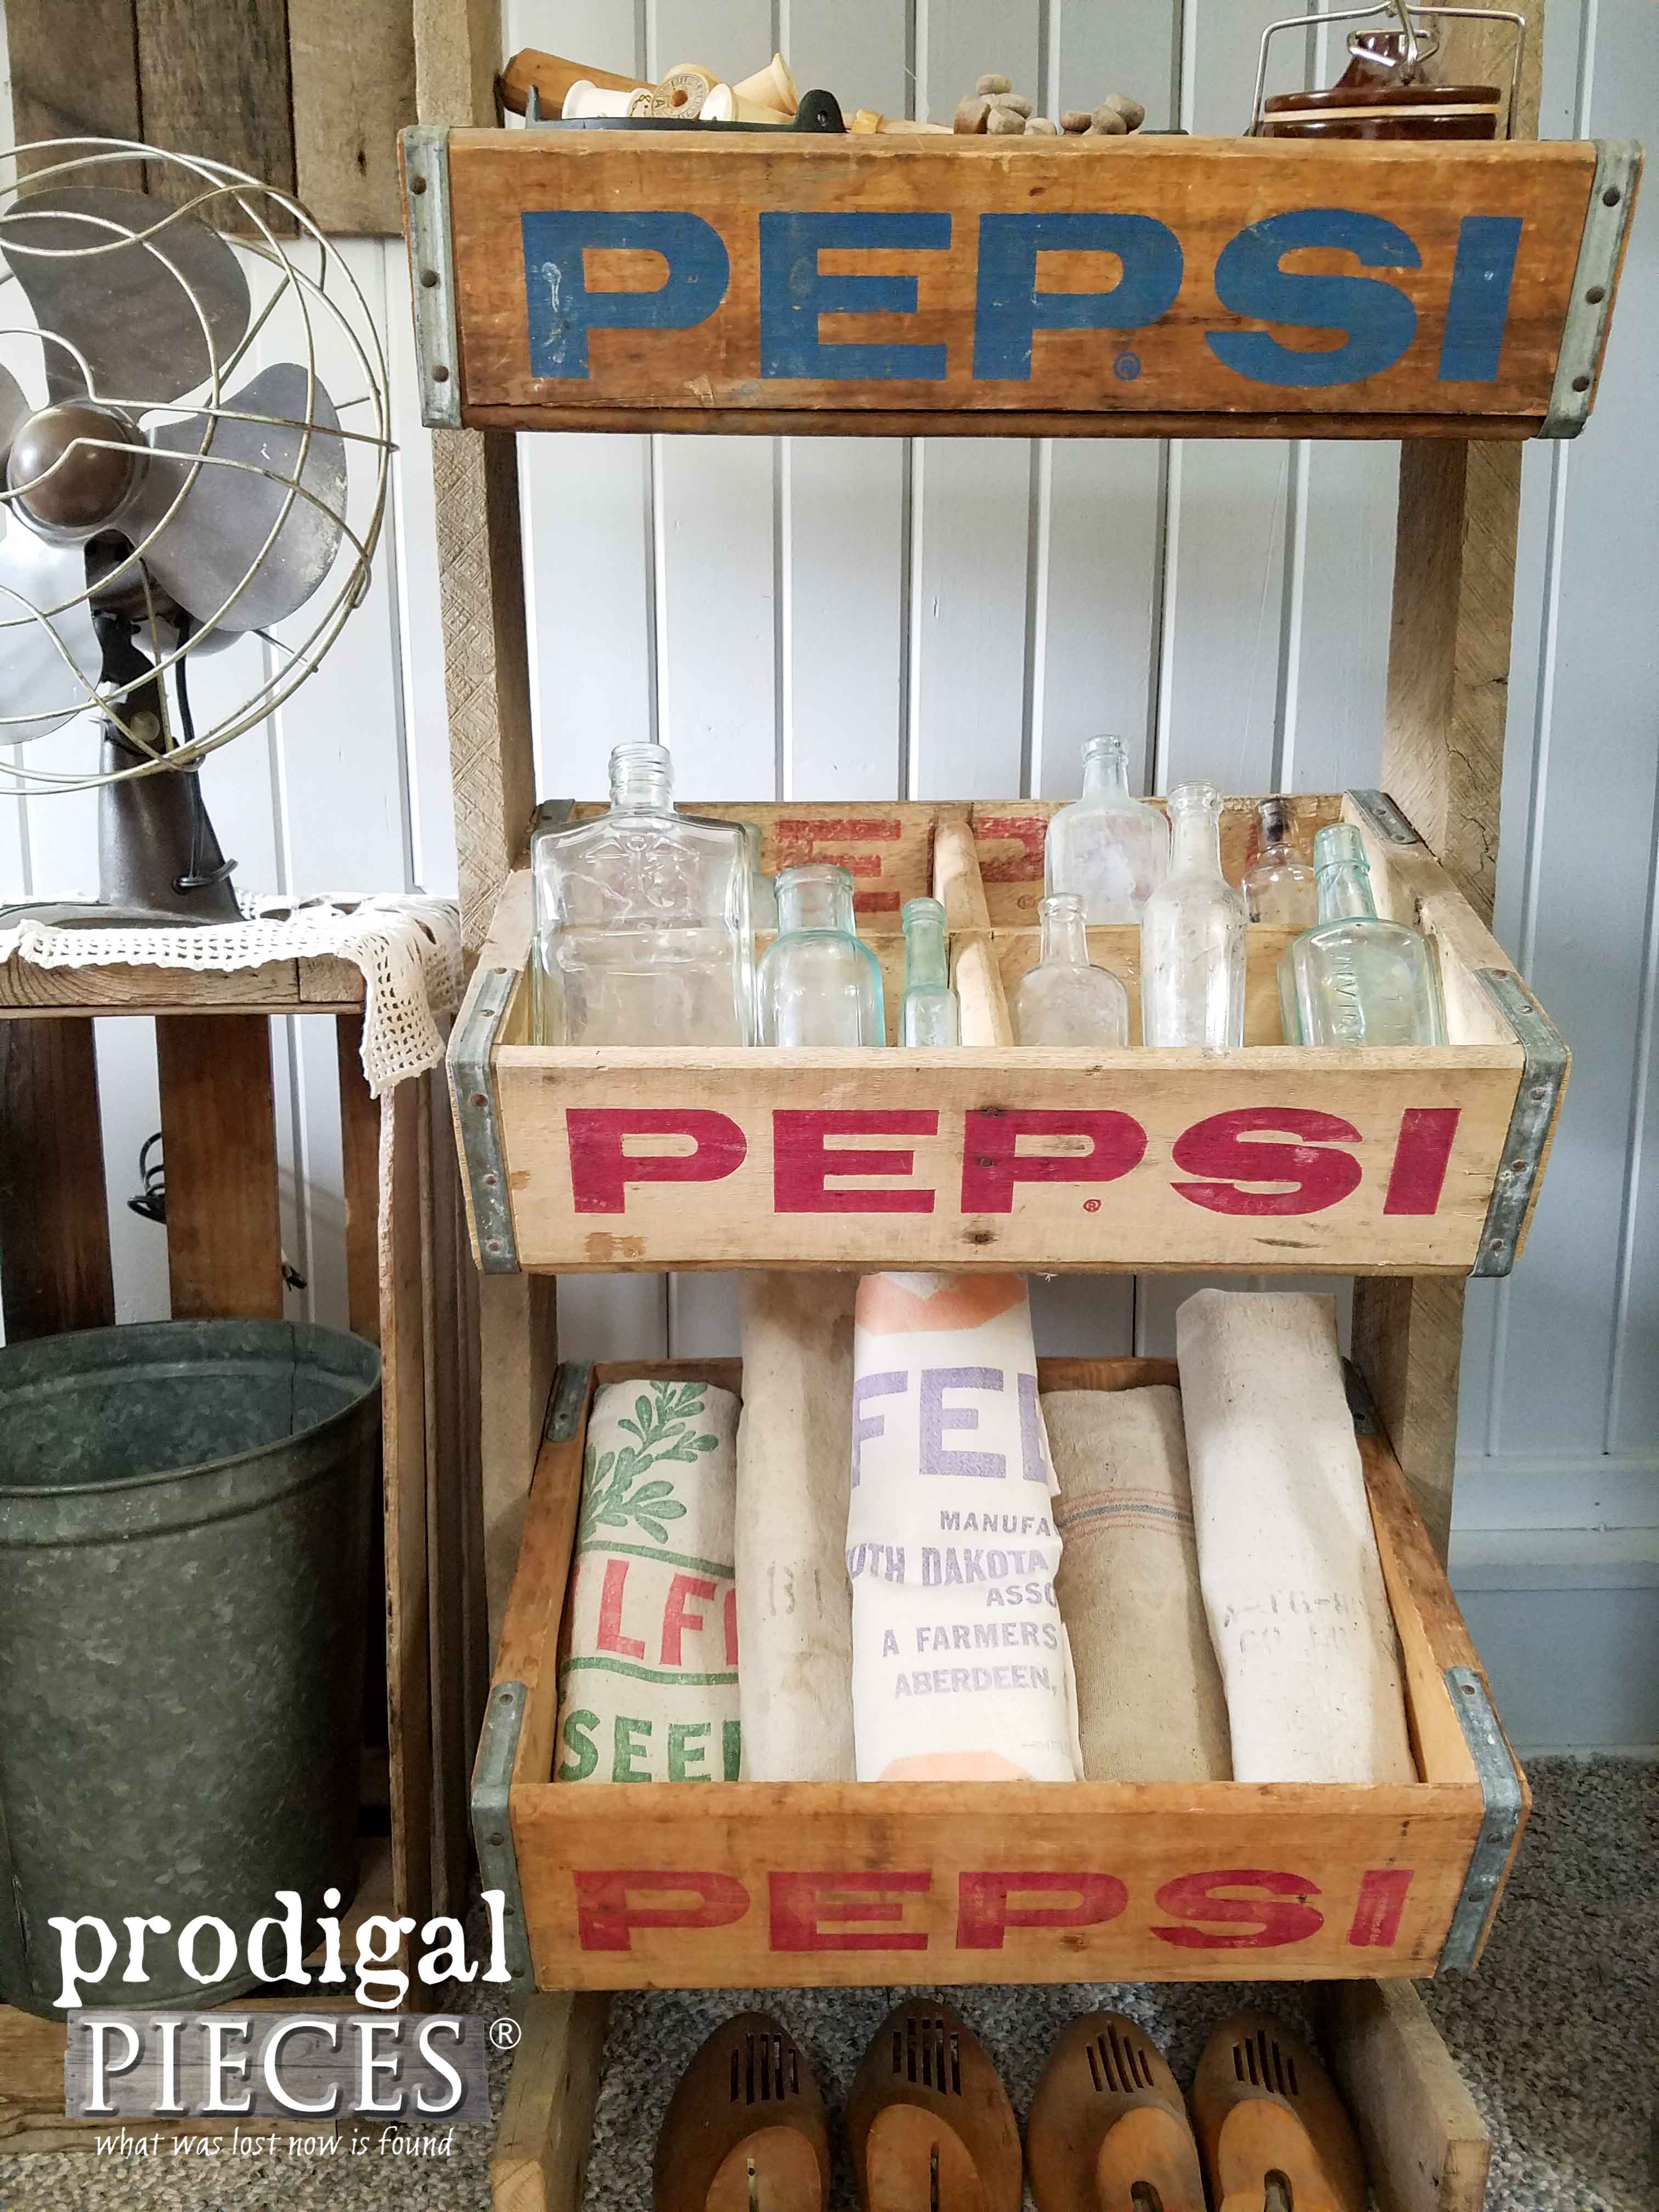 Collection of Antique Apothecary Bottles and Feed Sacks in Vintage Soda Crates | Prodigal Pieces | www.prodigalpieces.com